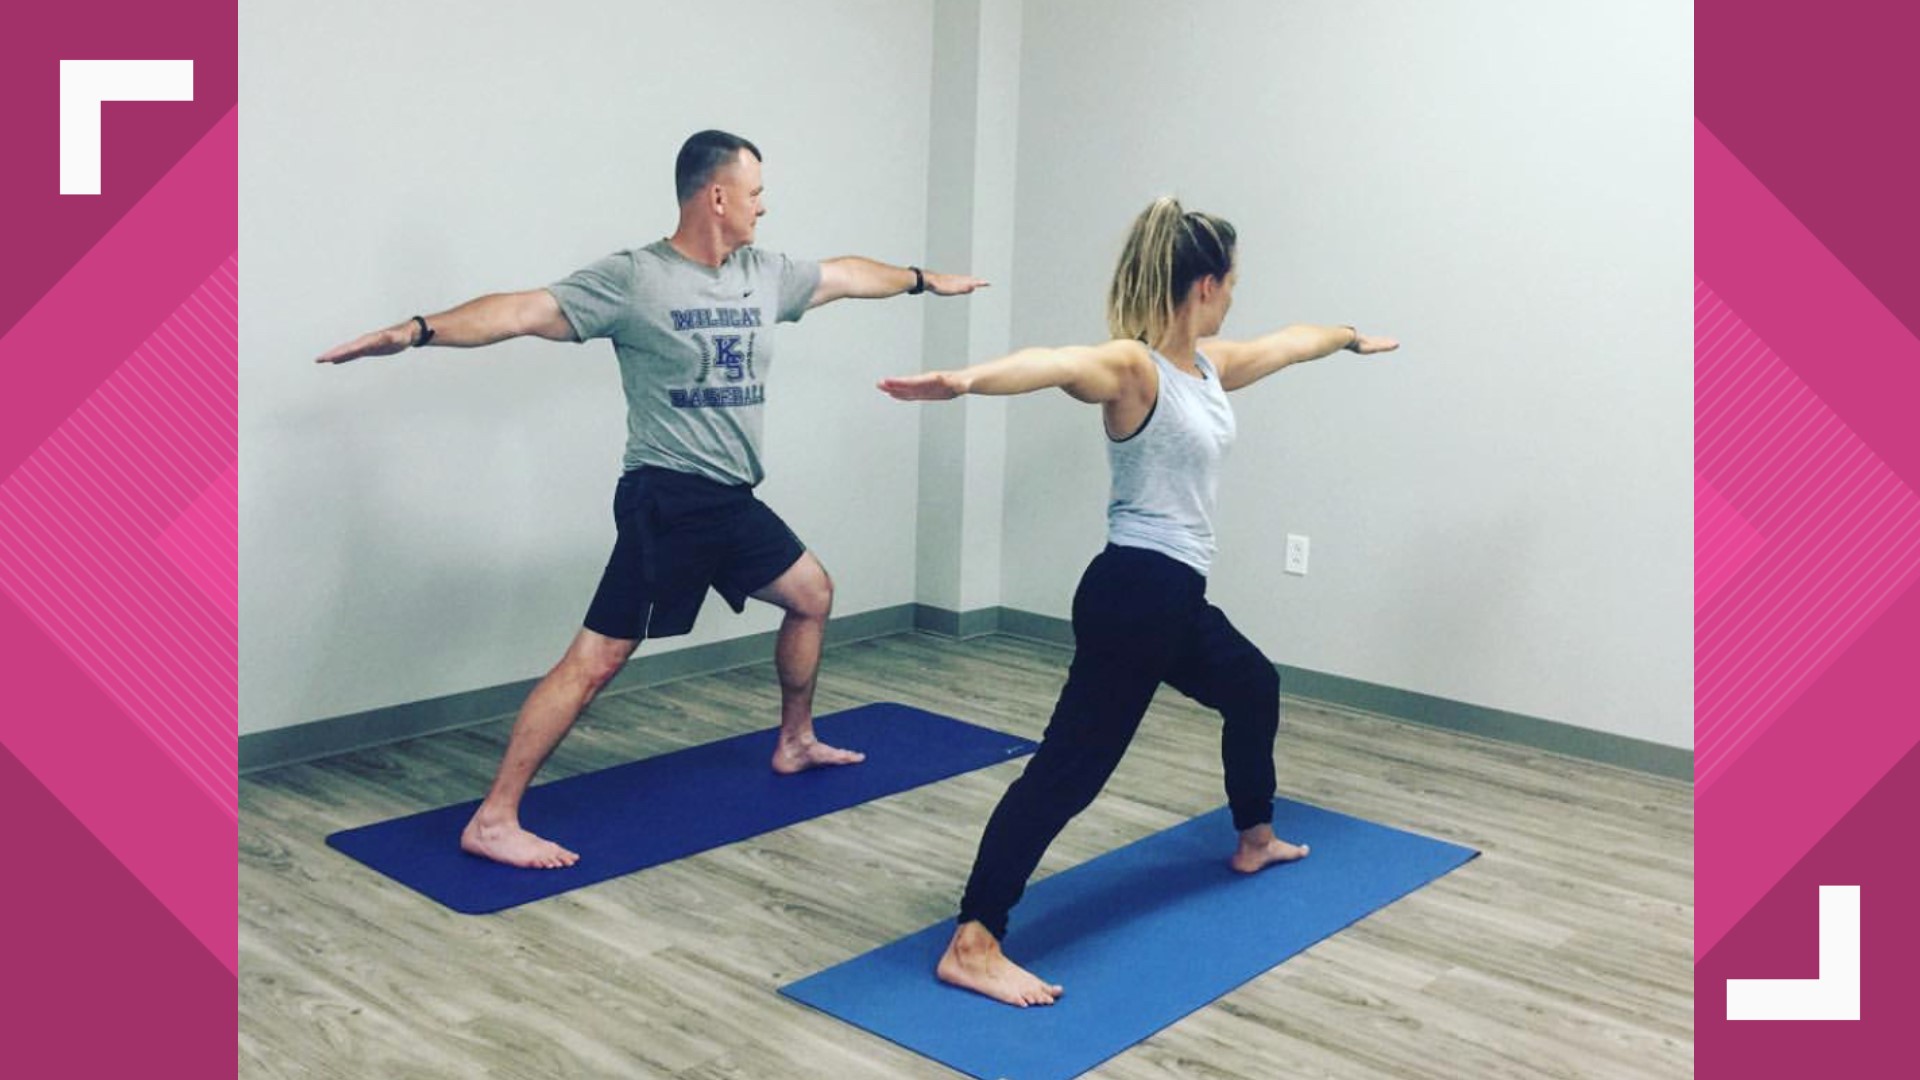 Life Moves Yoga in Killeen offers free classes Wednesday nights for military members, veterans, spouses and kids older than 12.